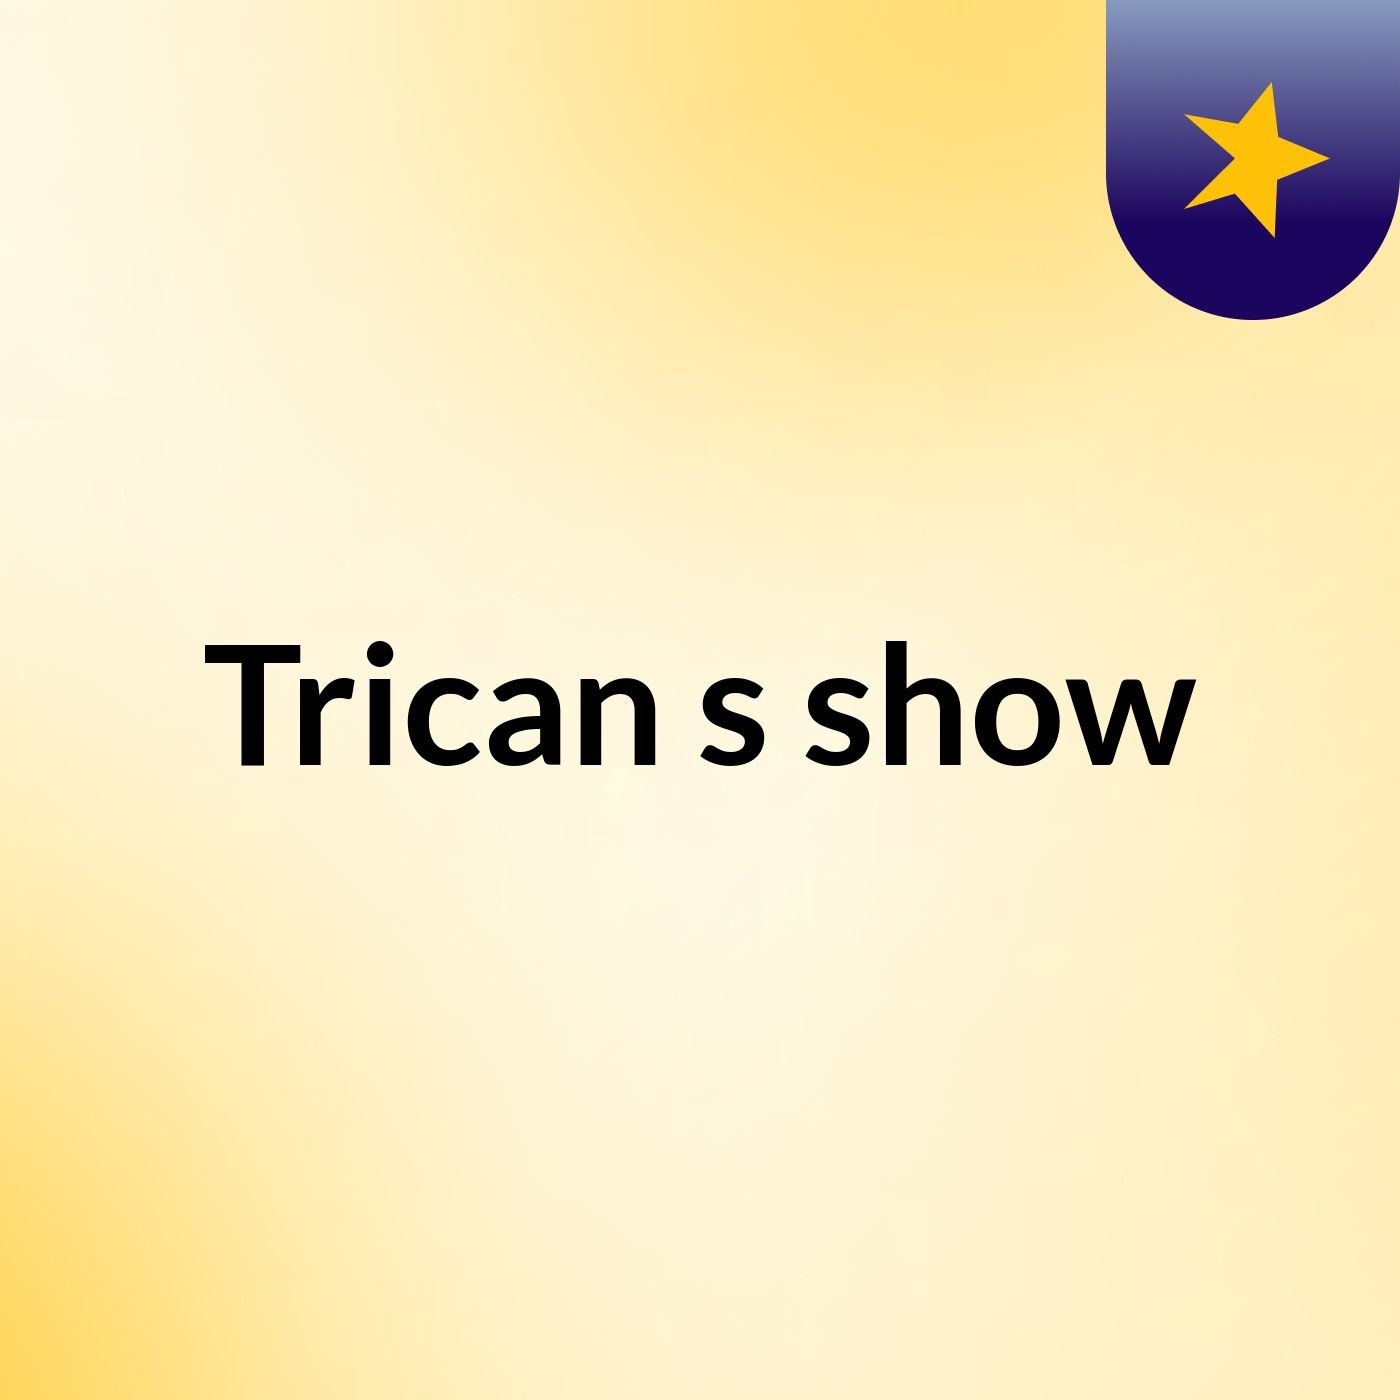 Trican's show